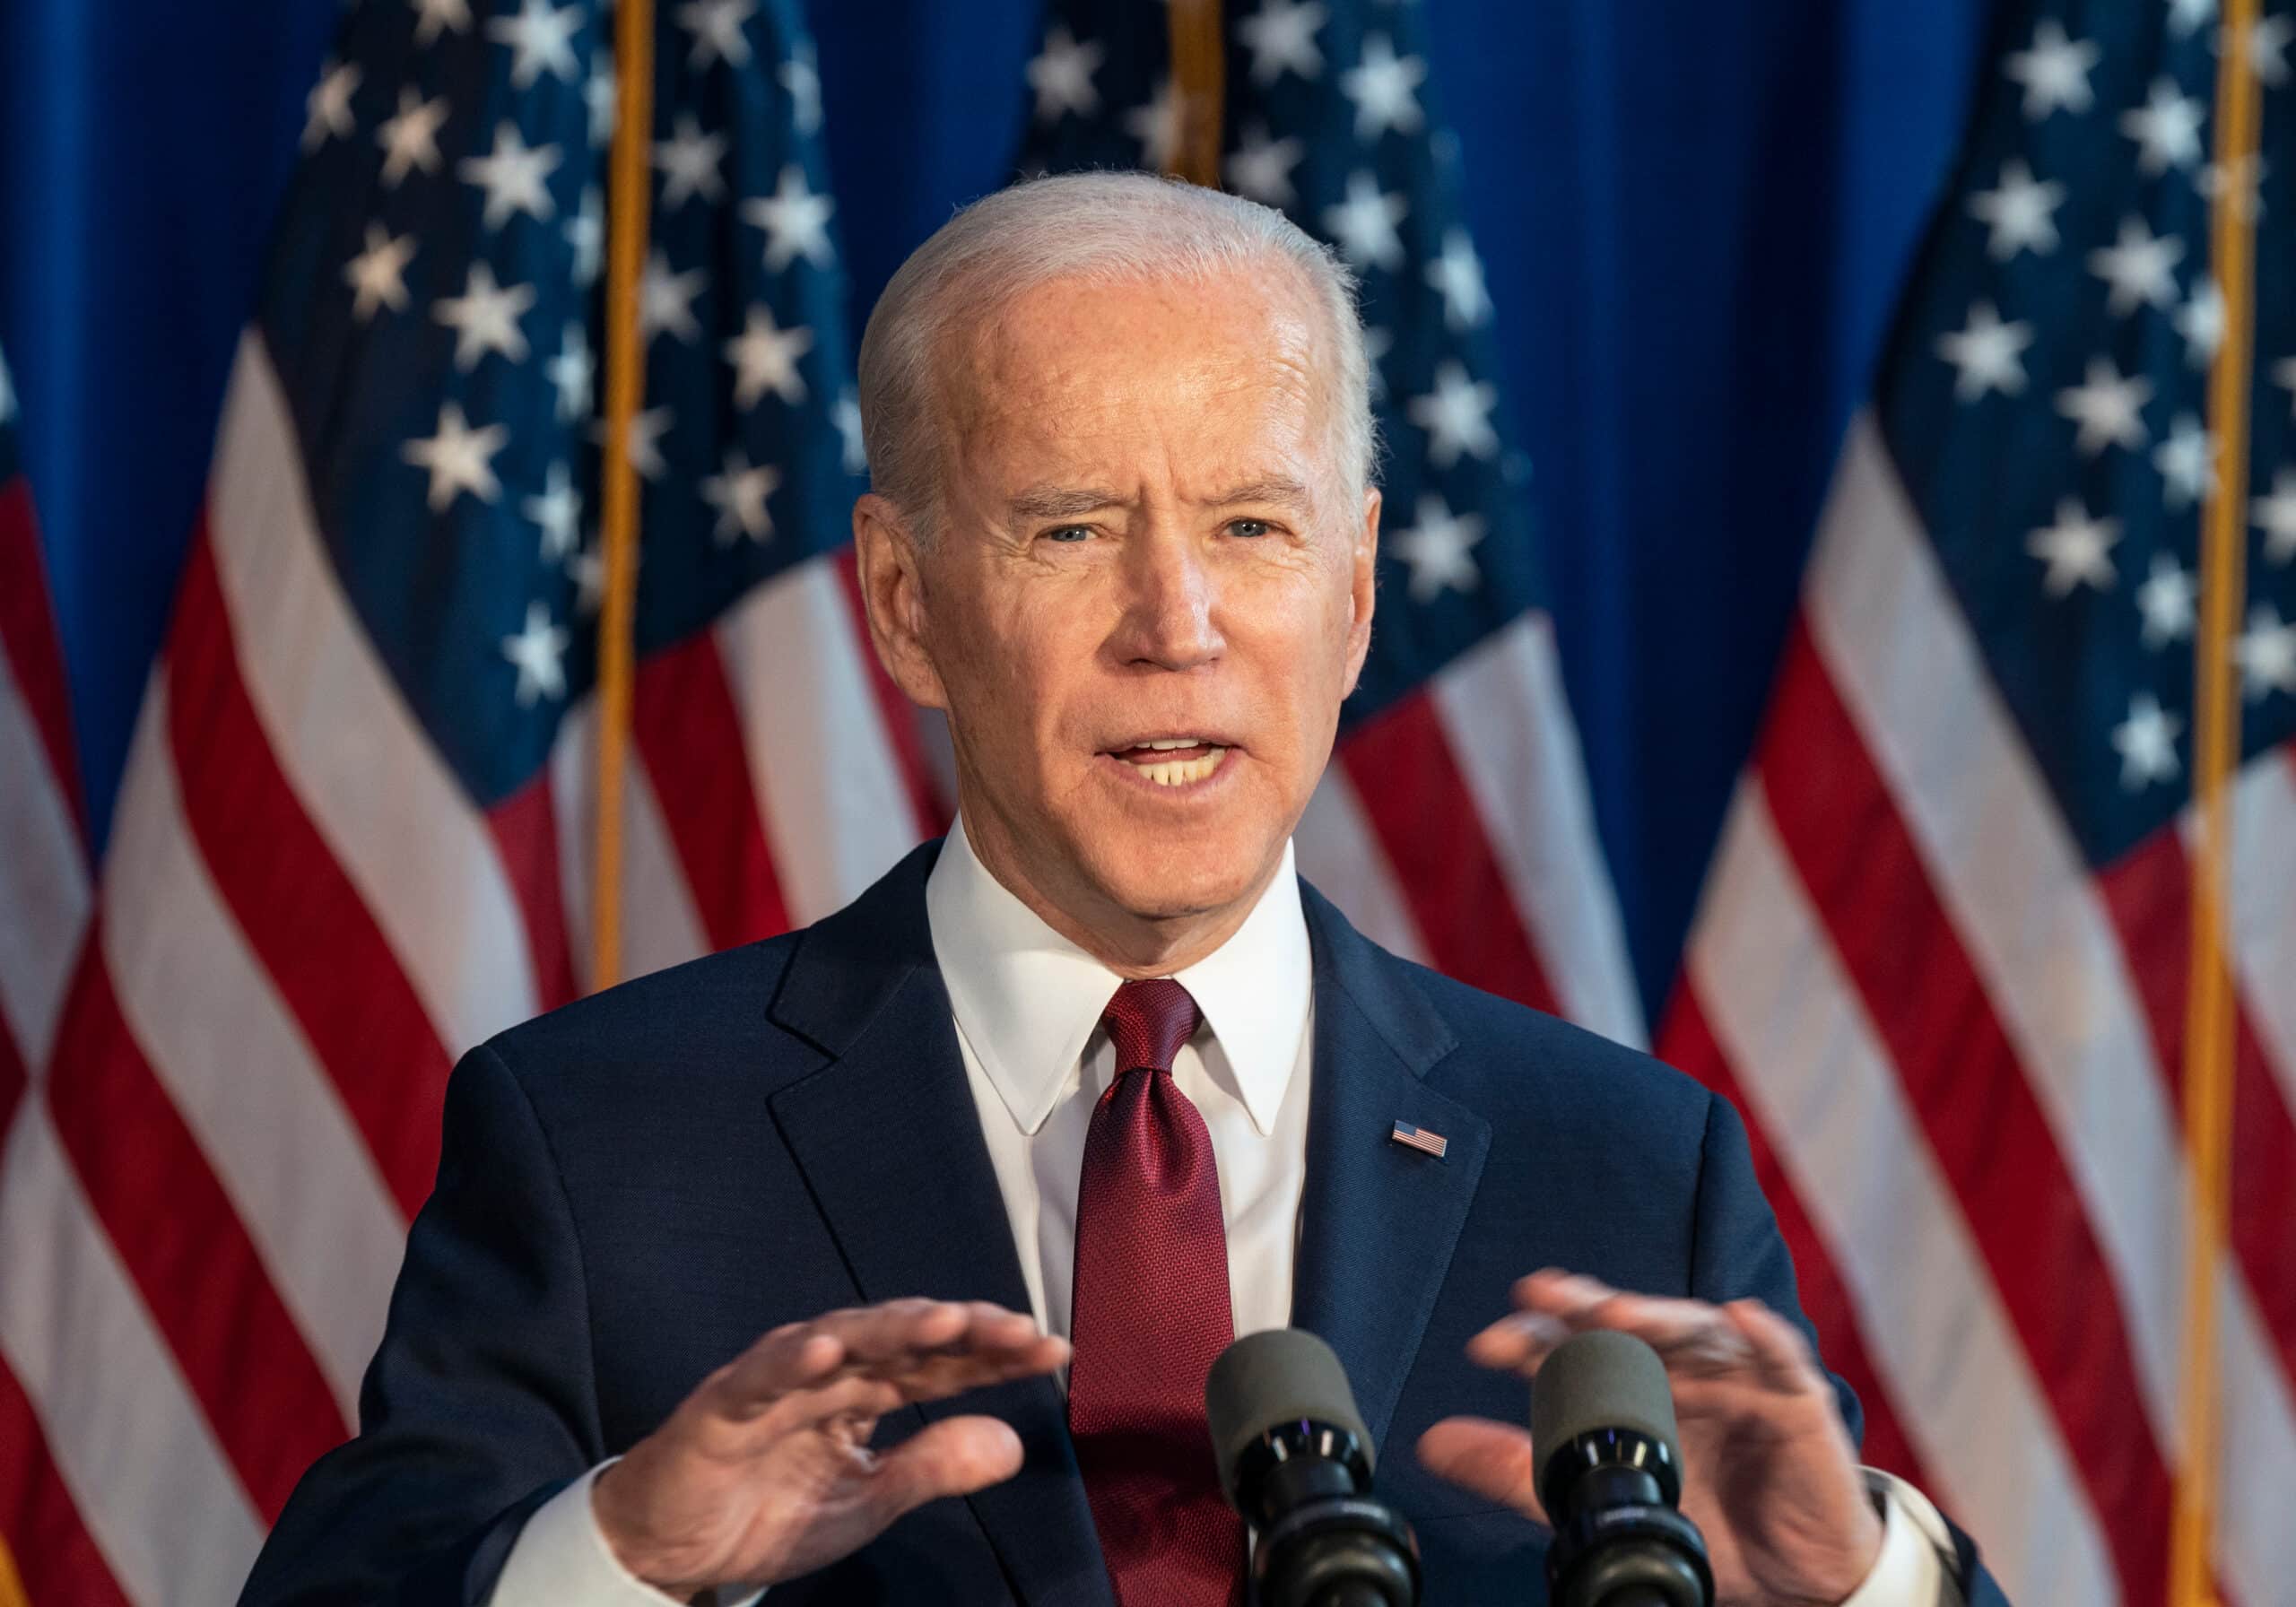 President Biden’s budget proposal includes noteworthy tax provisions